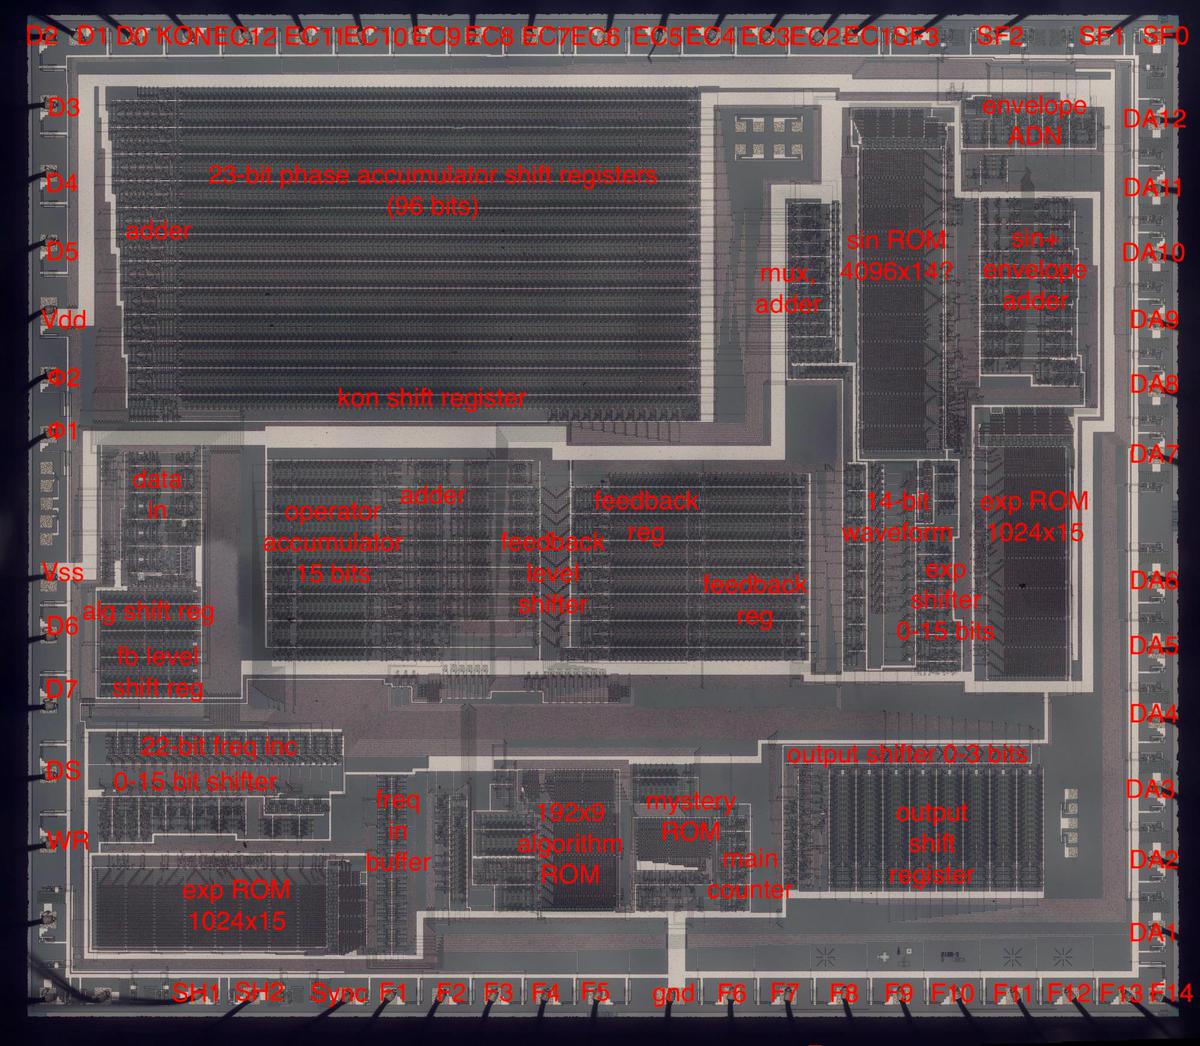 Die with the pins and major functional blocks labeled. (Click for a larger version.)